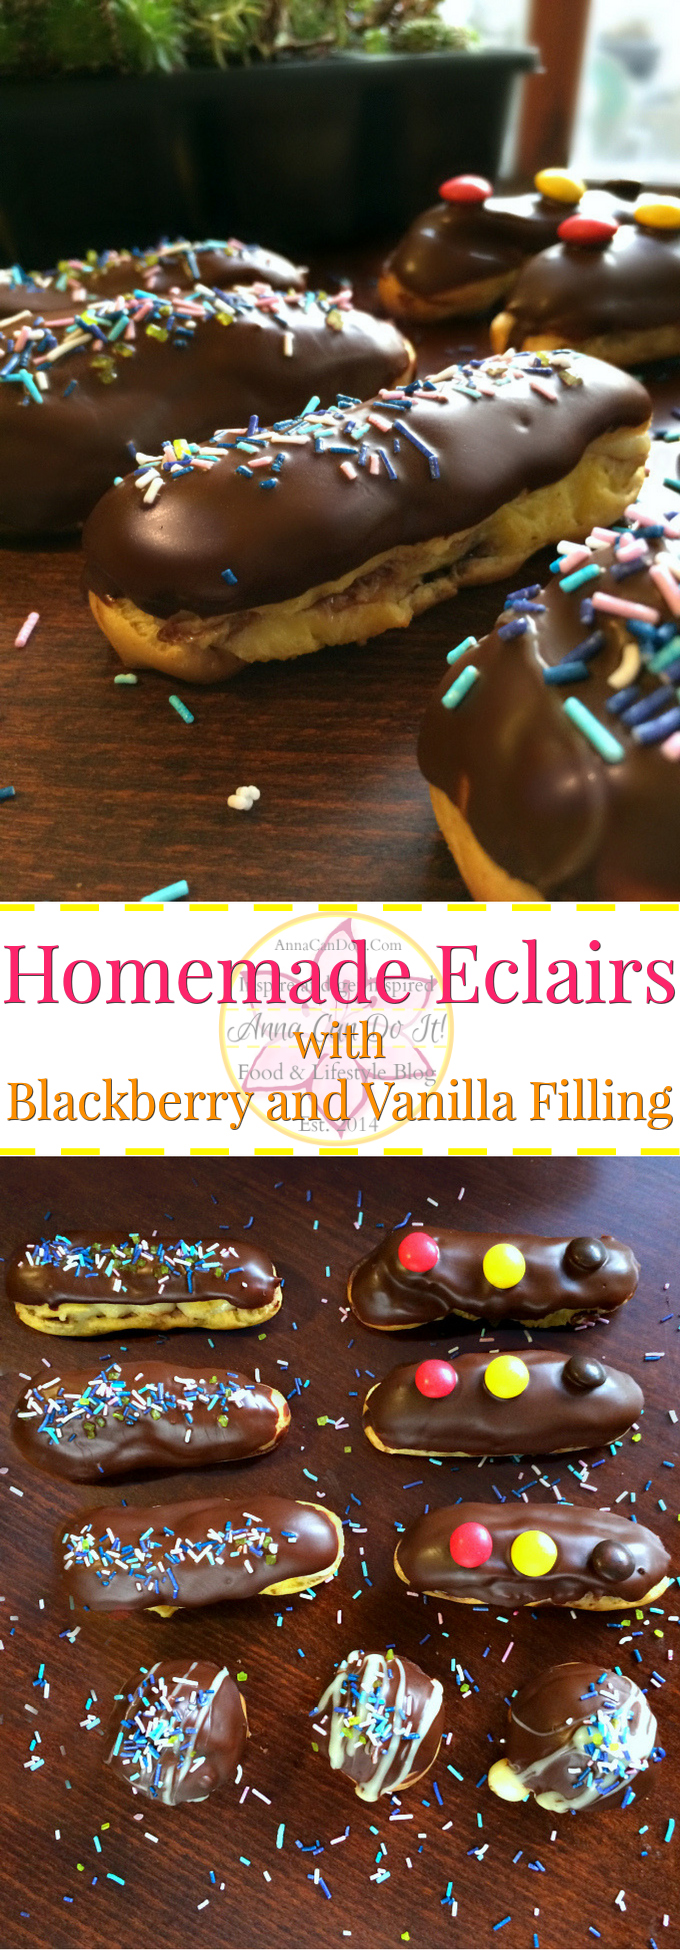 Homemade Eclairs with Blackberry and Vanilla Filling - Anna Can Do It! - Homemade Eclairs with Blackberry and Vanilla Filling are delicious and unbelievably simple to make them on your own.